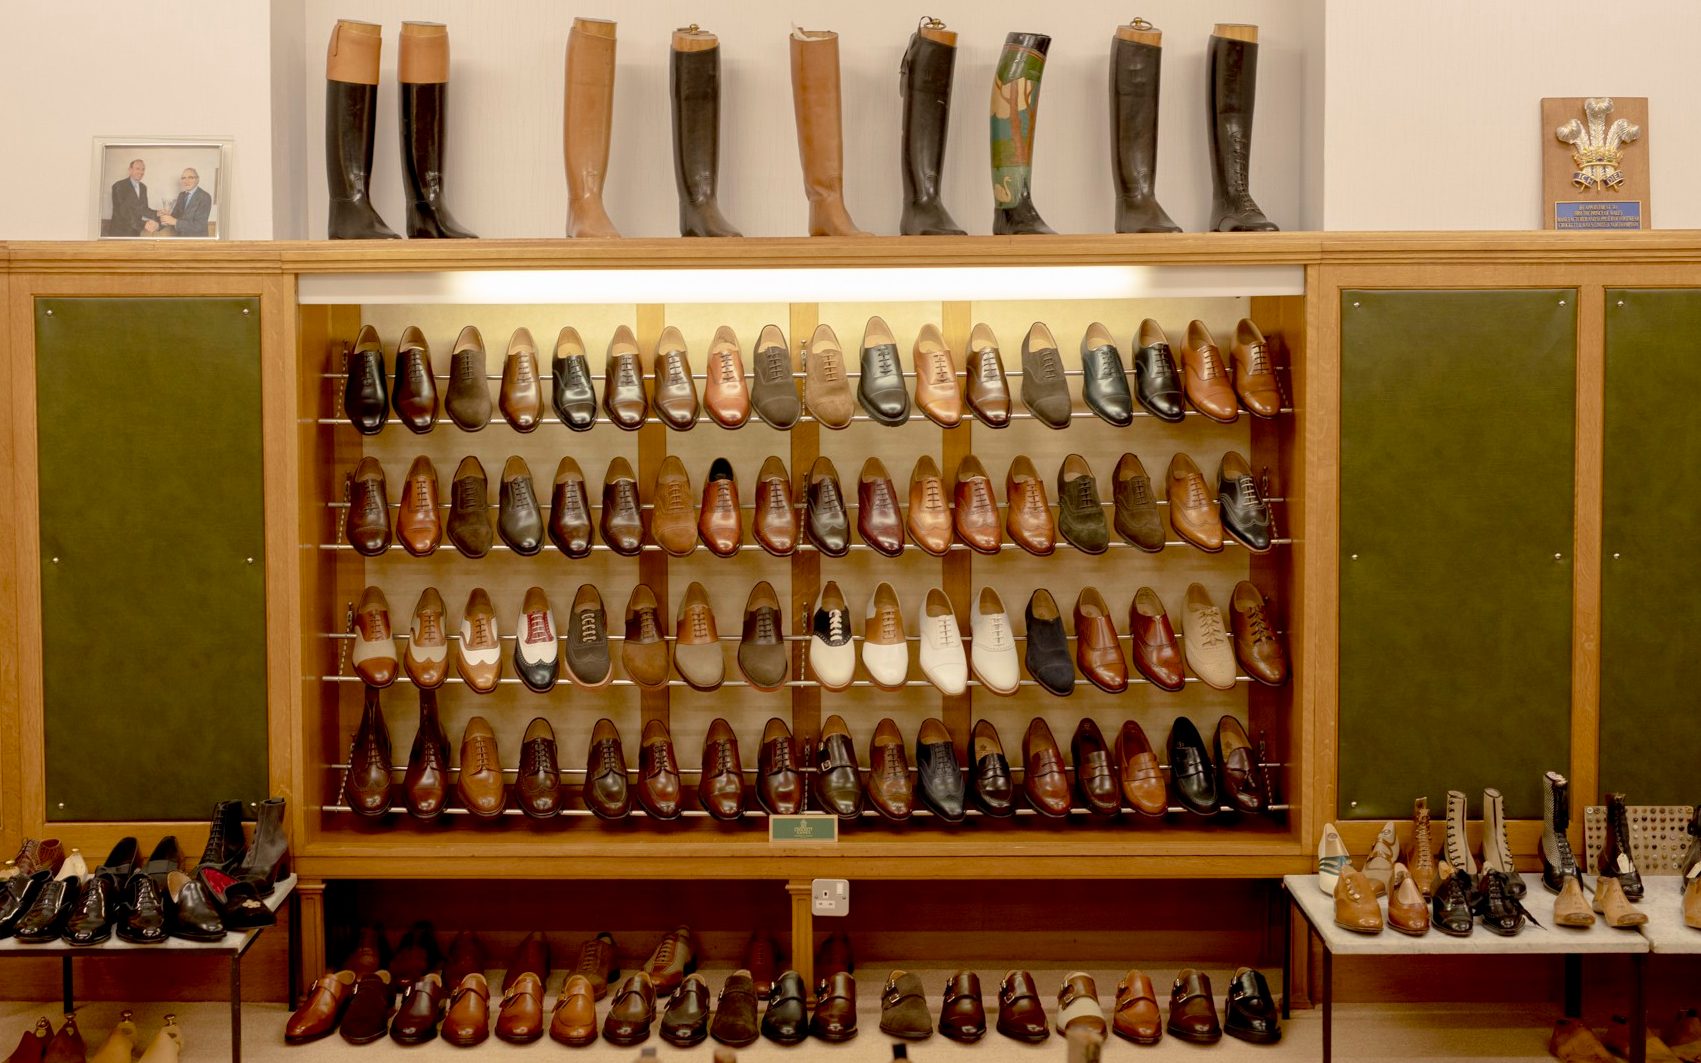 inside the historic factory of the king’s favourite shoemaker